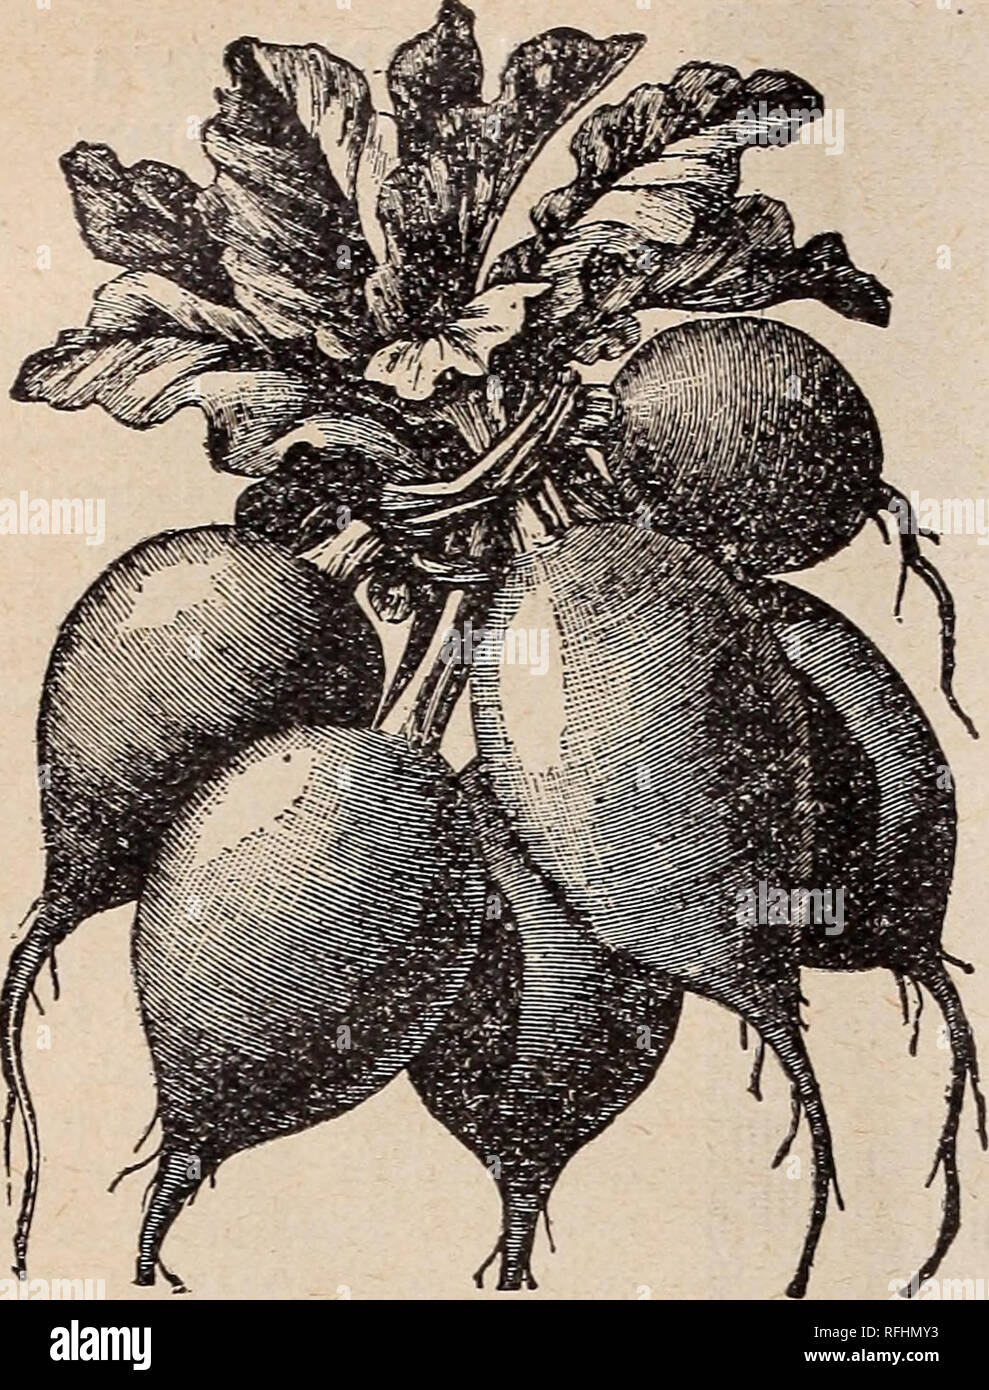 . Leonard's market gardeners' catalogue : season 1900. Nursery stock Illinois Chicago Catalogs; Flowers Seeds Catalogs; Vegetables Seeds Catalogs; Agricultural implements Catalogs. 14 S. F. LEONARD'S MARKET GARDENERS' PRICES.. RADISH SCARLET GLOBE. Our stock of this popular Forcing Radish is consid- ered the best by all the Chicago radish growers. For the greenhouse or hot-bed it is the most satisfactory- radish yet found, and for early open ground sowing it gives excellent results. Leonard's stock has that brill- iant red color so much desired in a greenhouse radish. The flesh is pure, white, Stock Photo